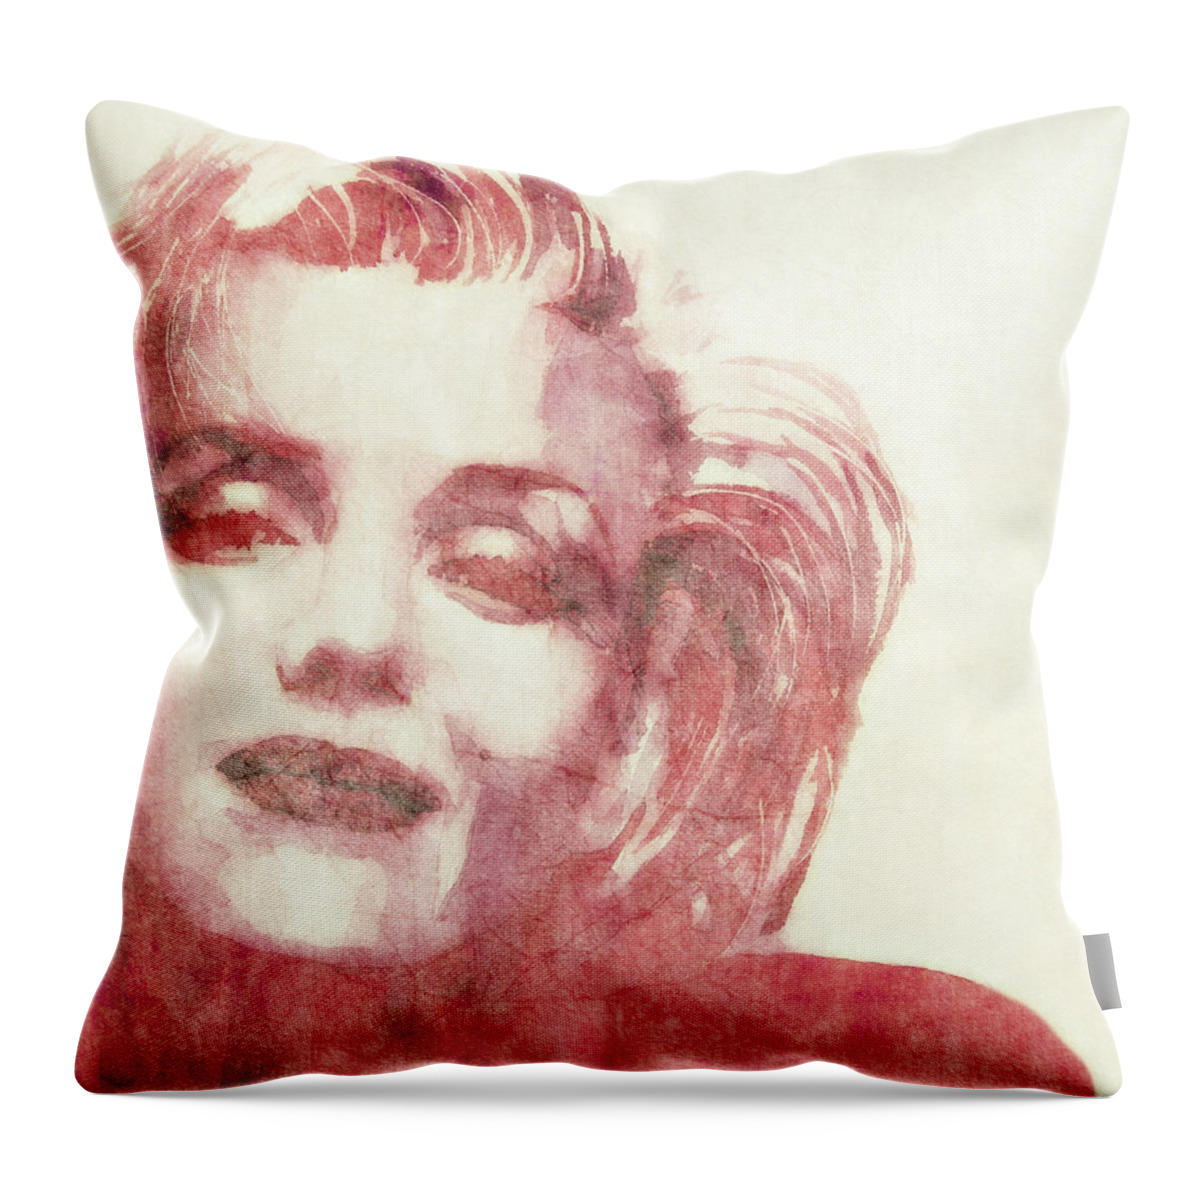 Marilyn Monroe Throw Pillow featuring the painting Dream A Little Dream Of Me by Paul Lovering